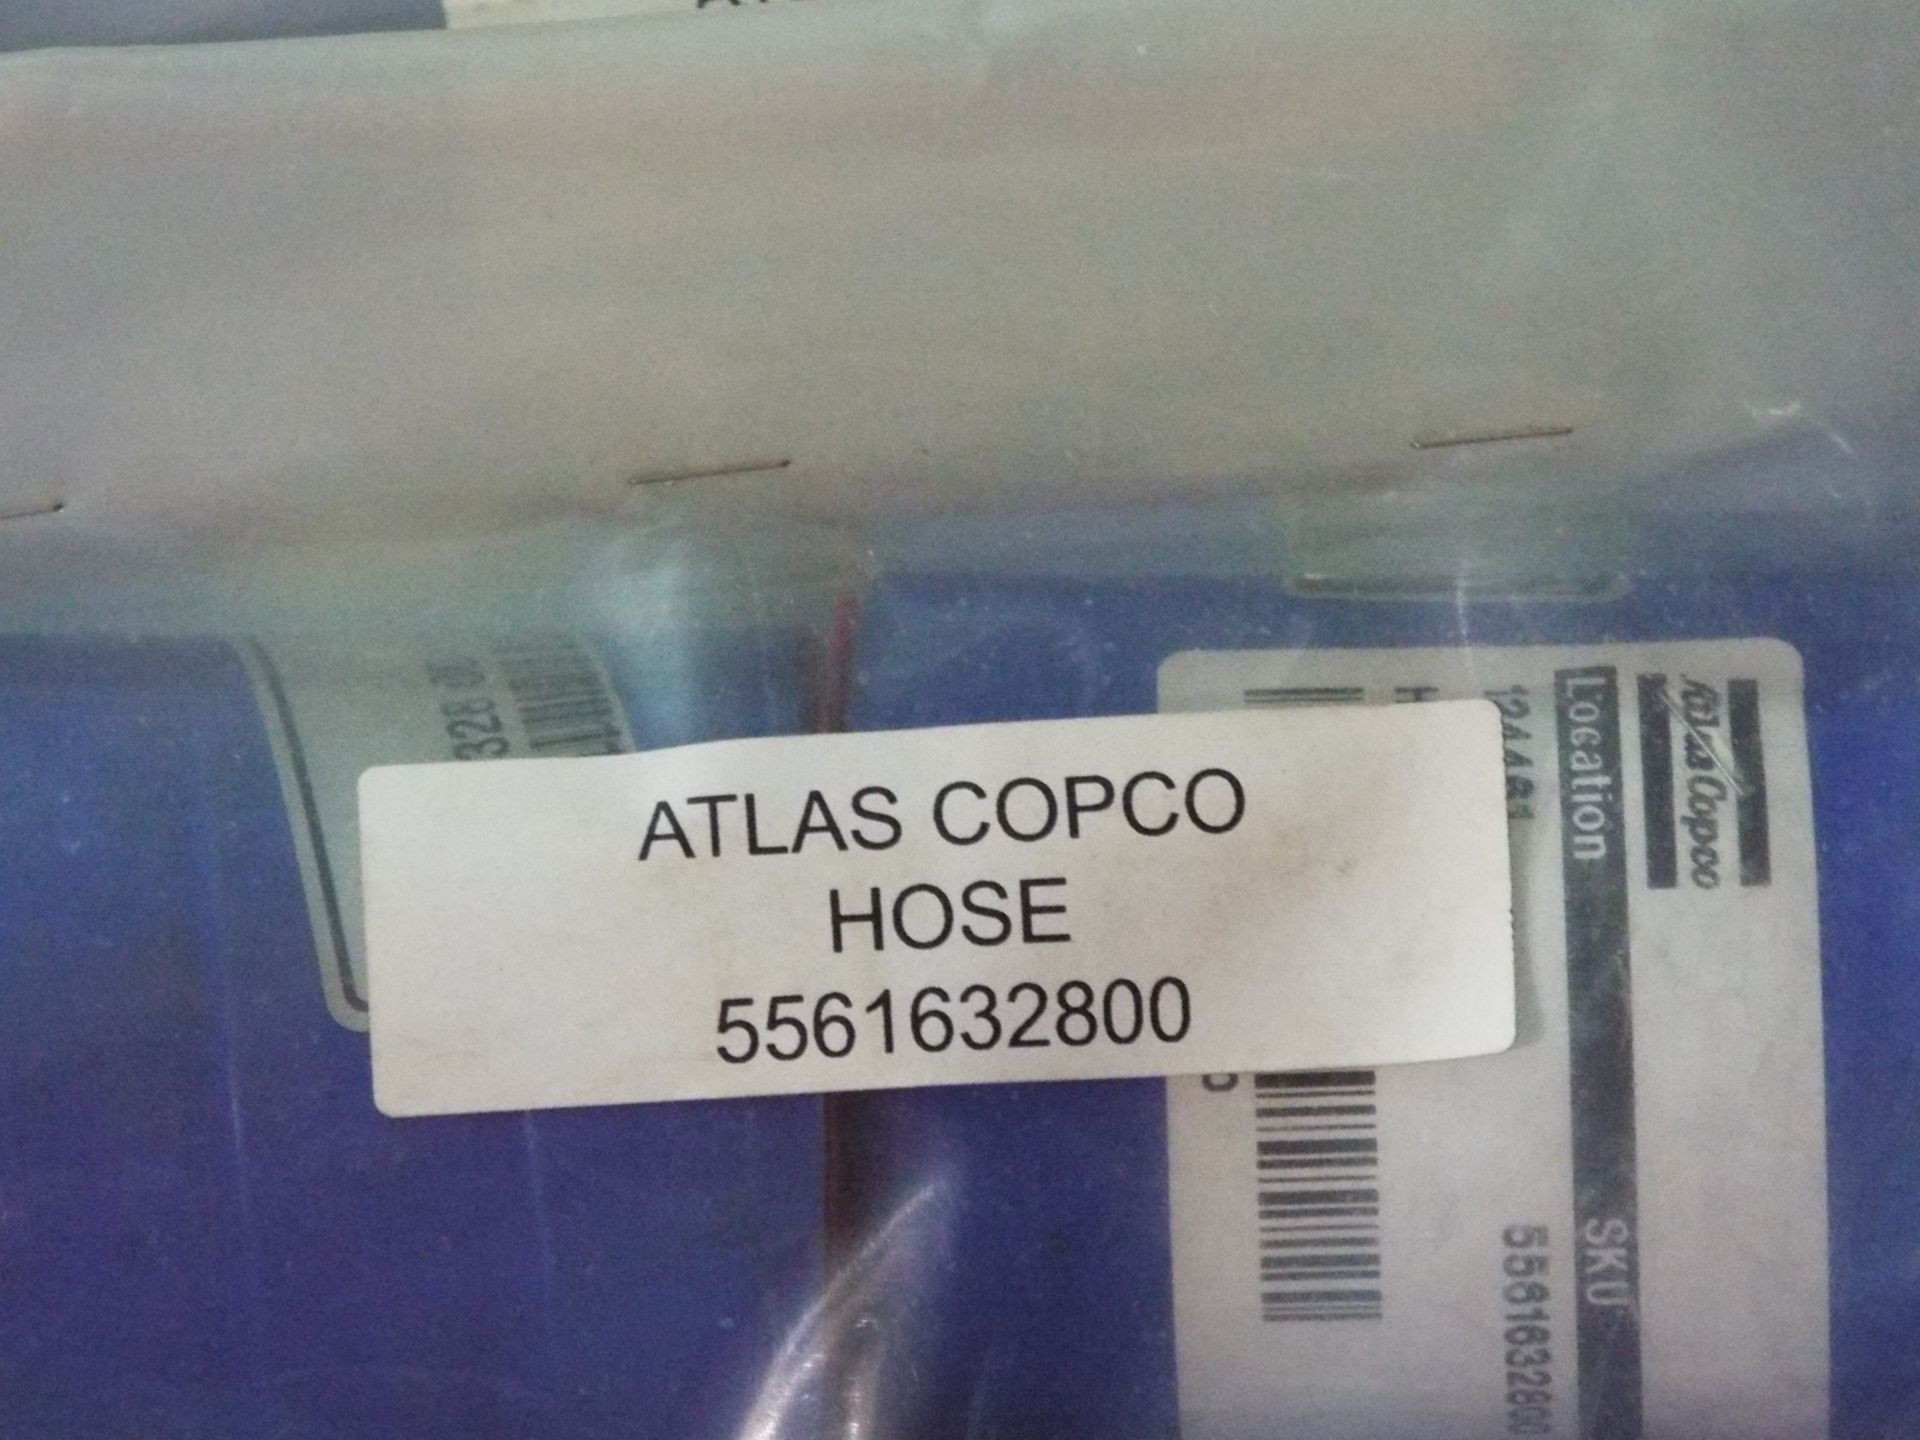 LOT/ ATLAS COPCO PARTS INCLUDING PIPE, FLOW CONTROL, NEEDLE VALVE, SEATBELT, HORN, AND HOSE - Image 12 of 14